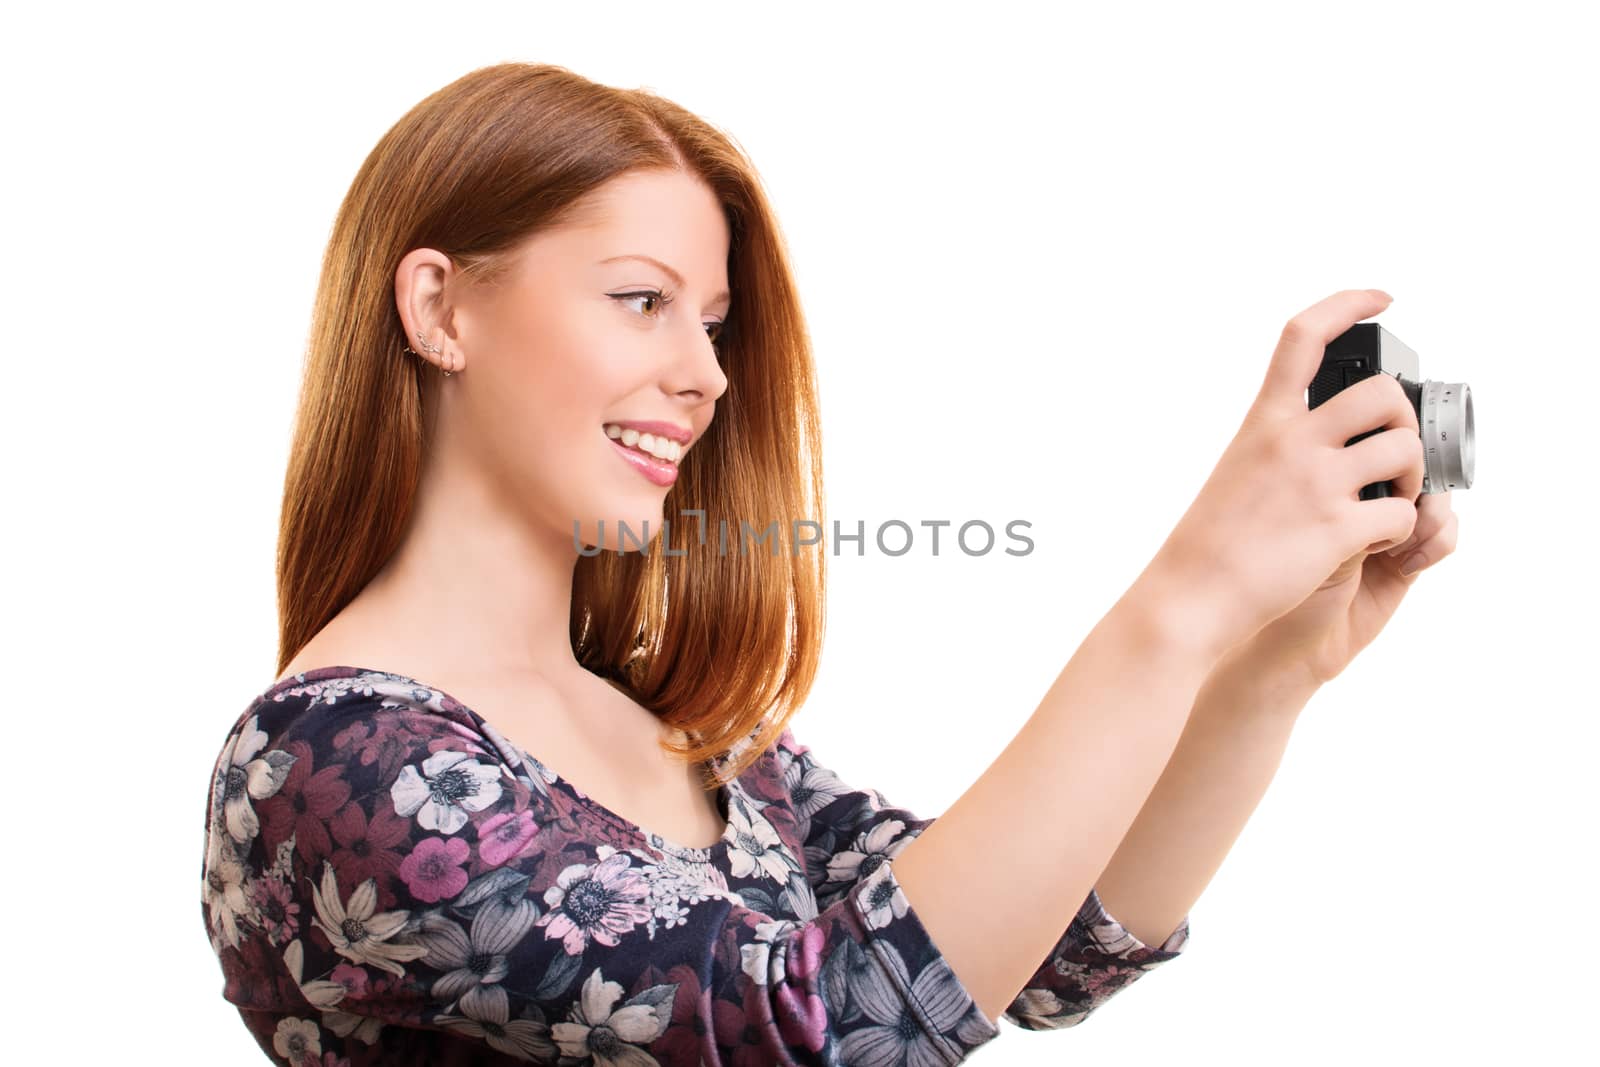 A portrait of a beautiful young girl taking a photo with a vintage camera, isolated on white background.